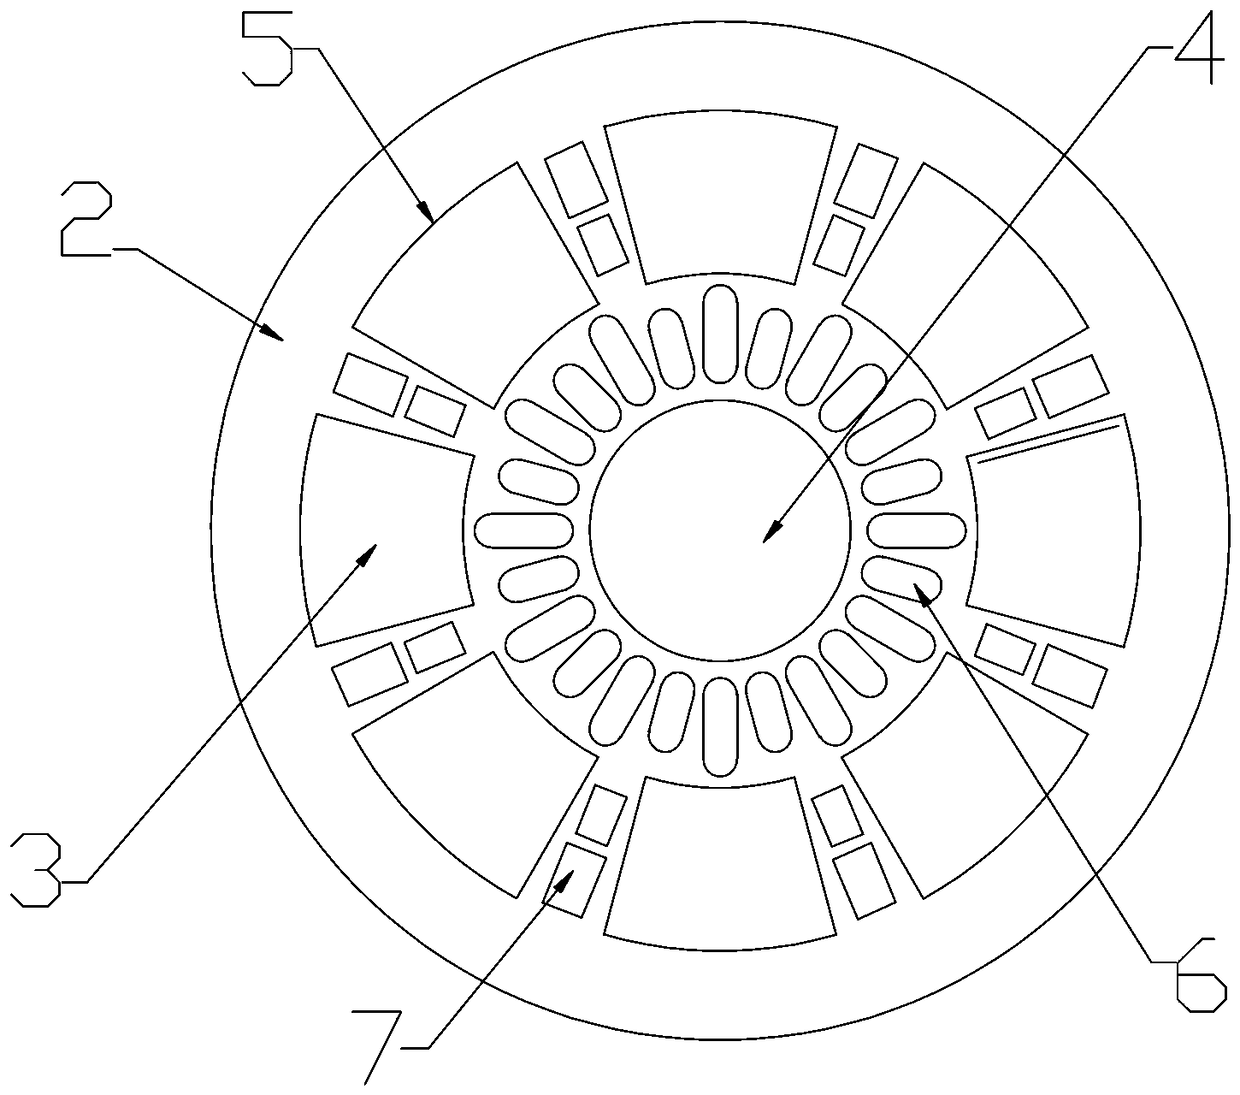 Fixing structure for magnetic steel of rotor of disk-type motor